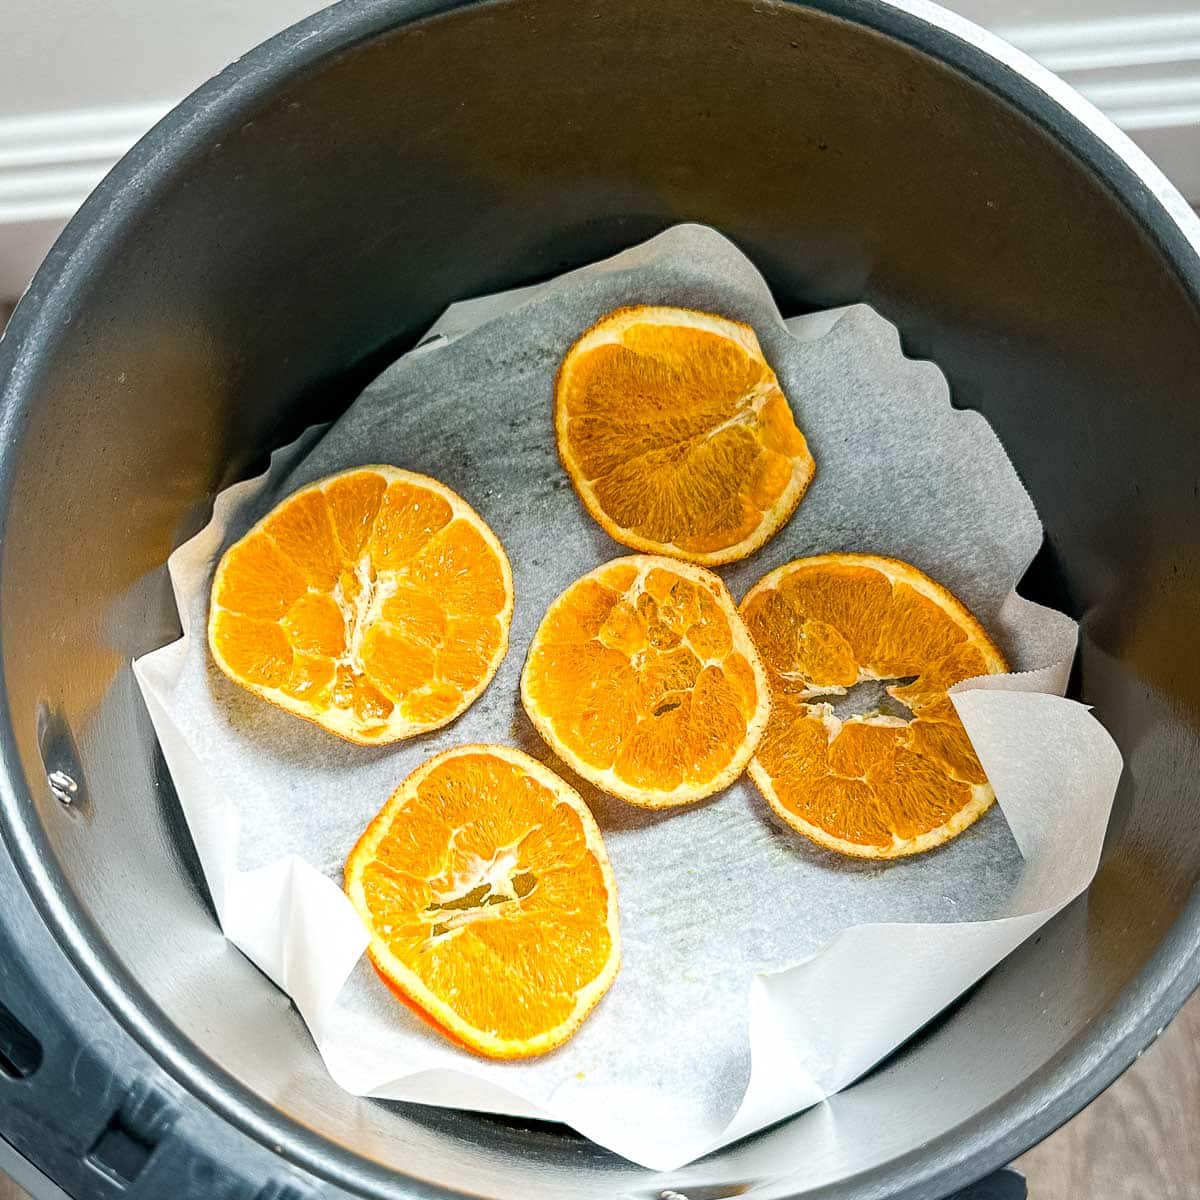 Dehydrated orange slices are shown in air fryer basket on parchment paper.